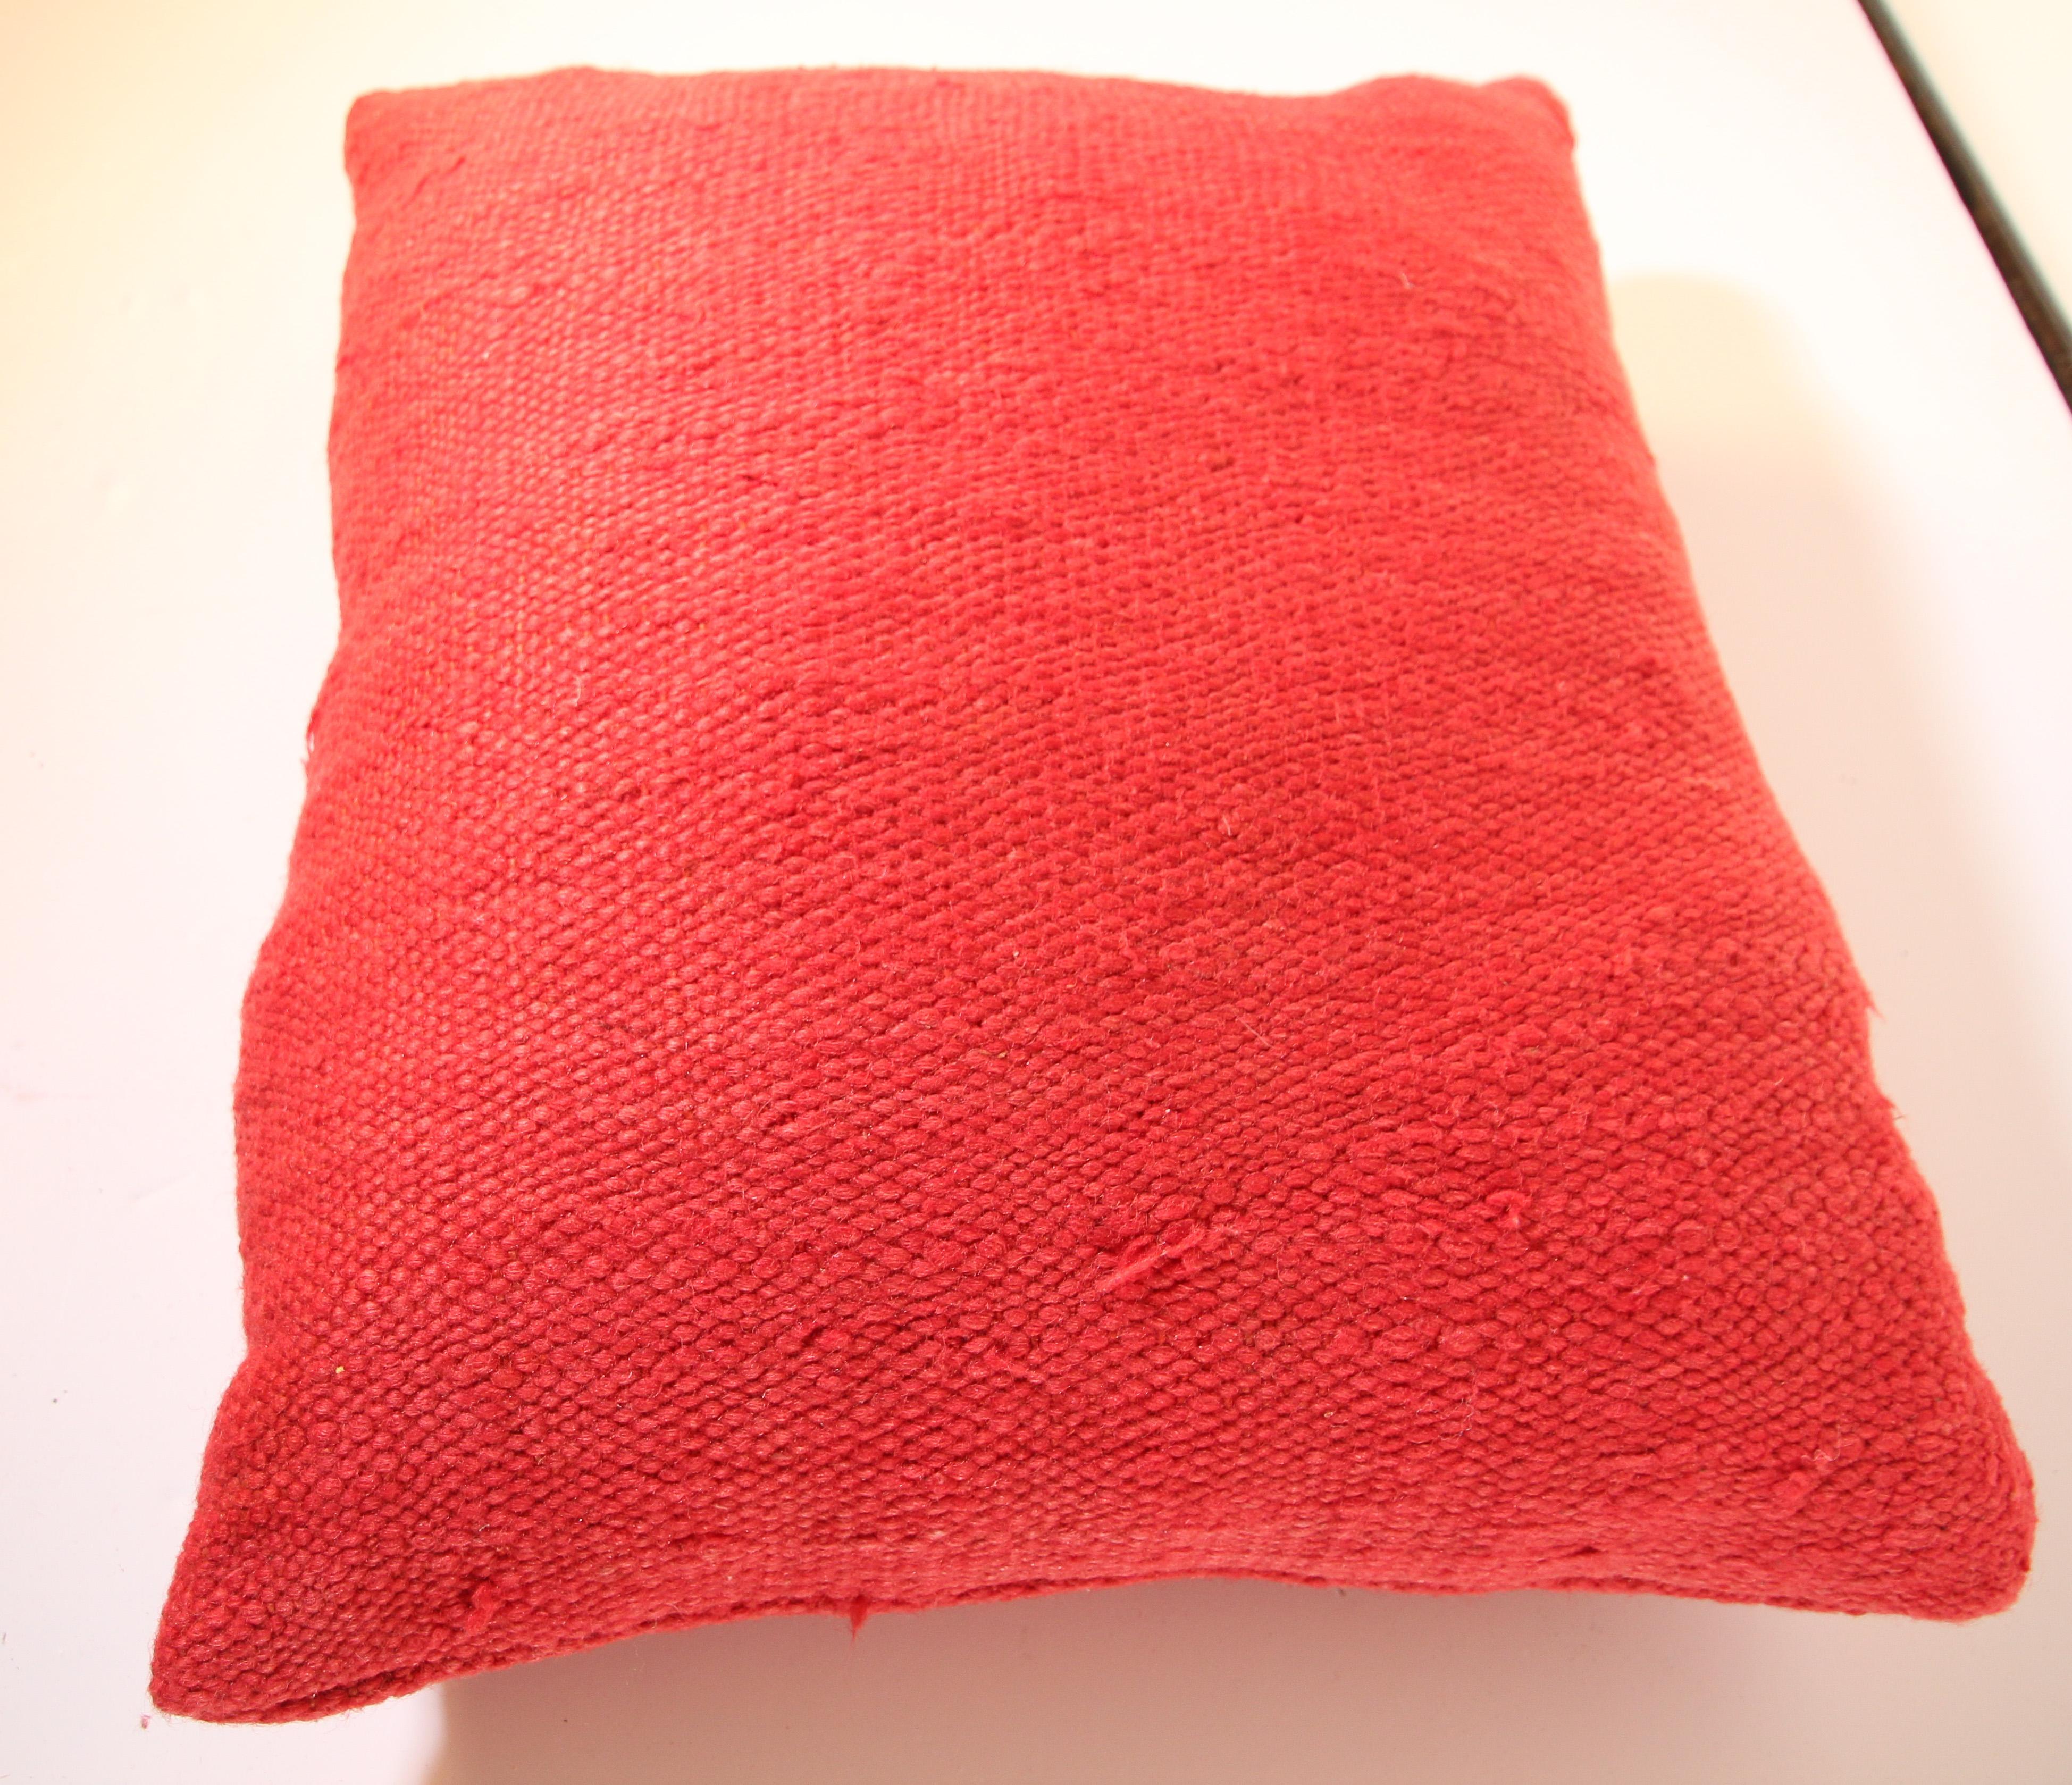 Wool Moroccan Red Berber Pillow Cut from a Vintage Tribal Stripes Rug